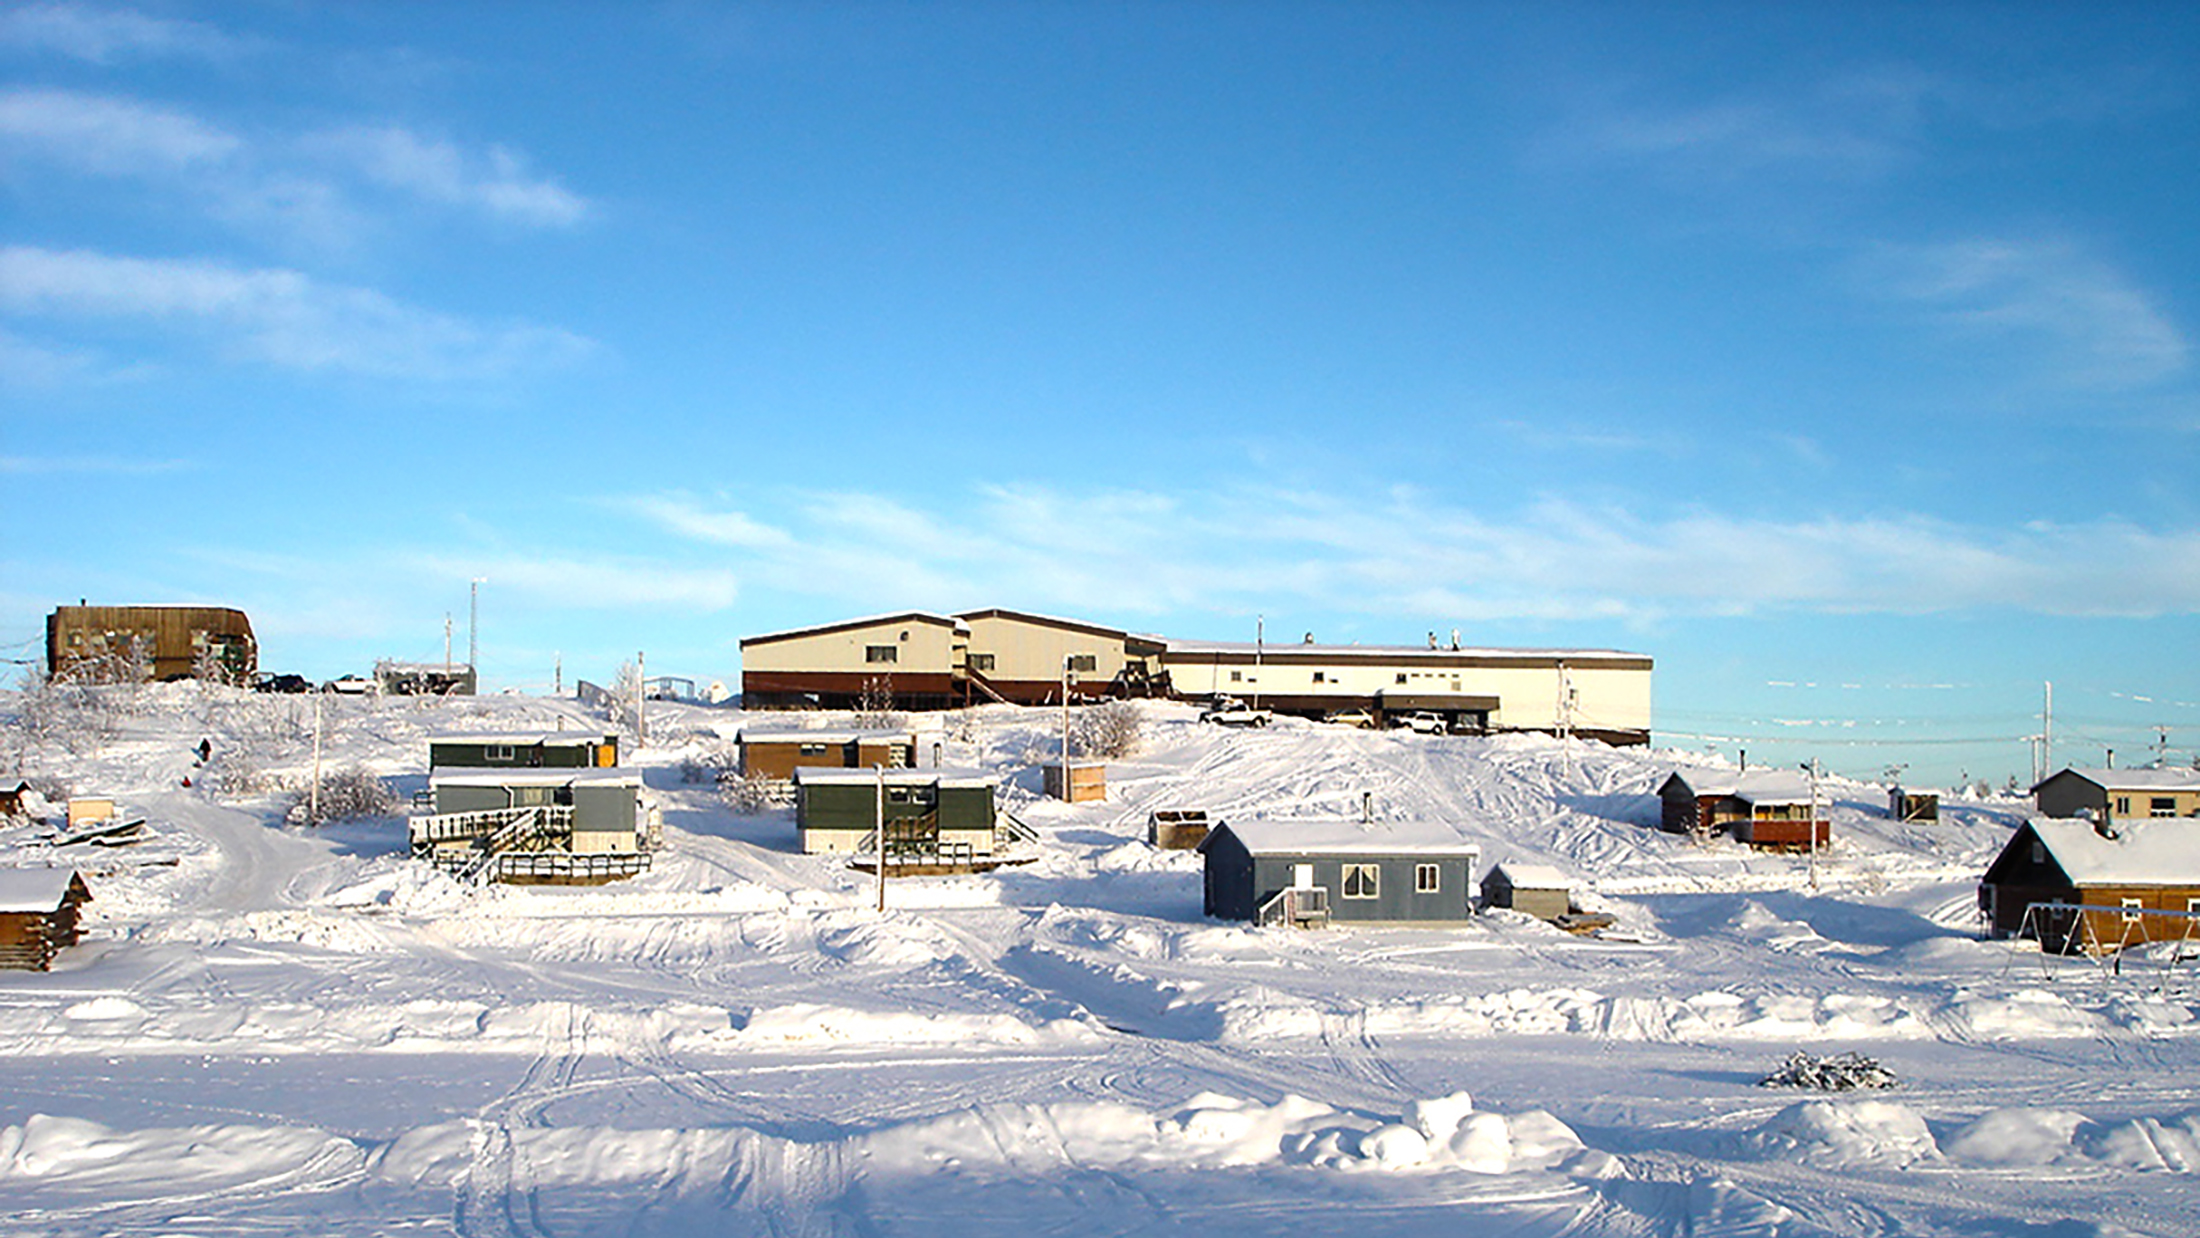 The Kasho Got'ine Housing Society (KGHS), the first Indigenous-led housing society in the Northwest Territories, set up a housing forum and follow-up work to develop action plans for housing development that meet the needs of the community. Emphasis is placed on a safe home for women and children.